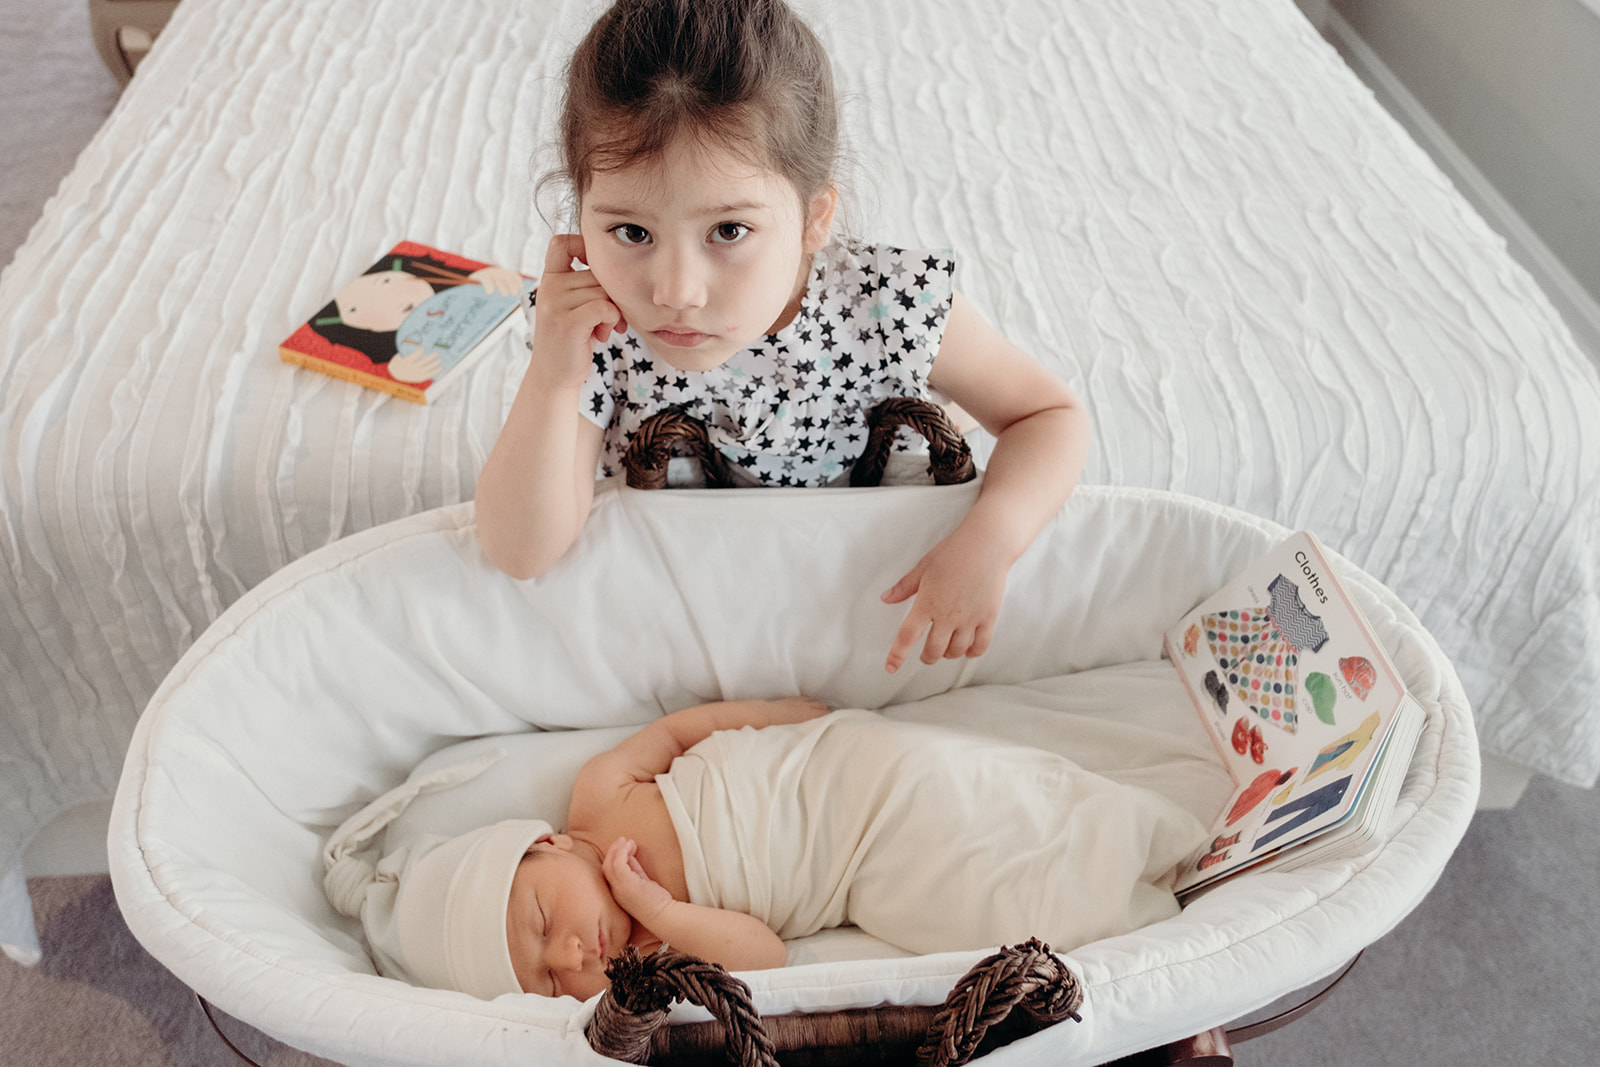 A little girl sits next to her baby brother in his bassinet during an in-home family photography session.